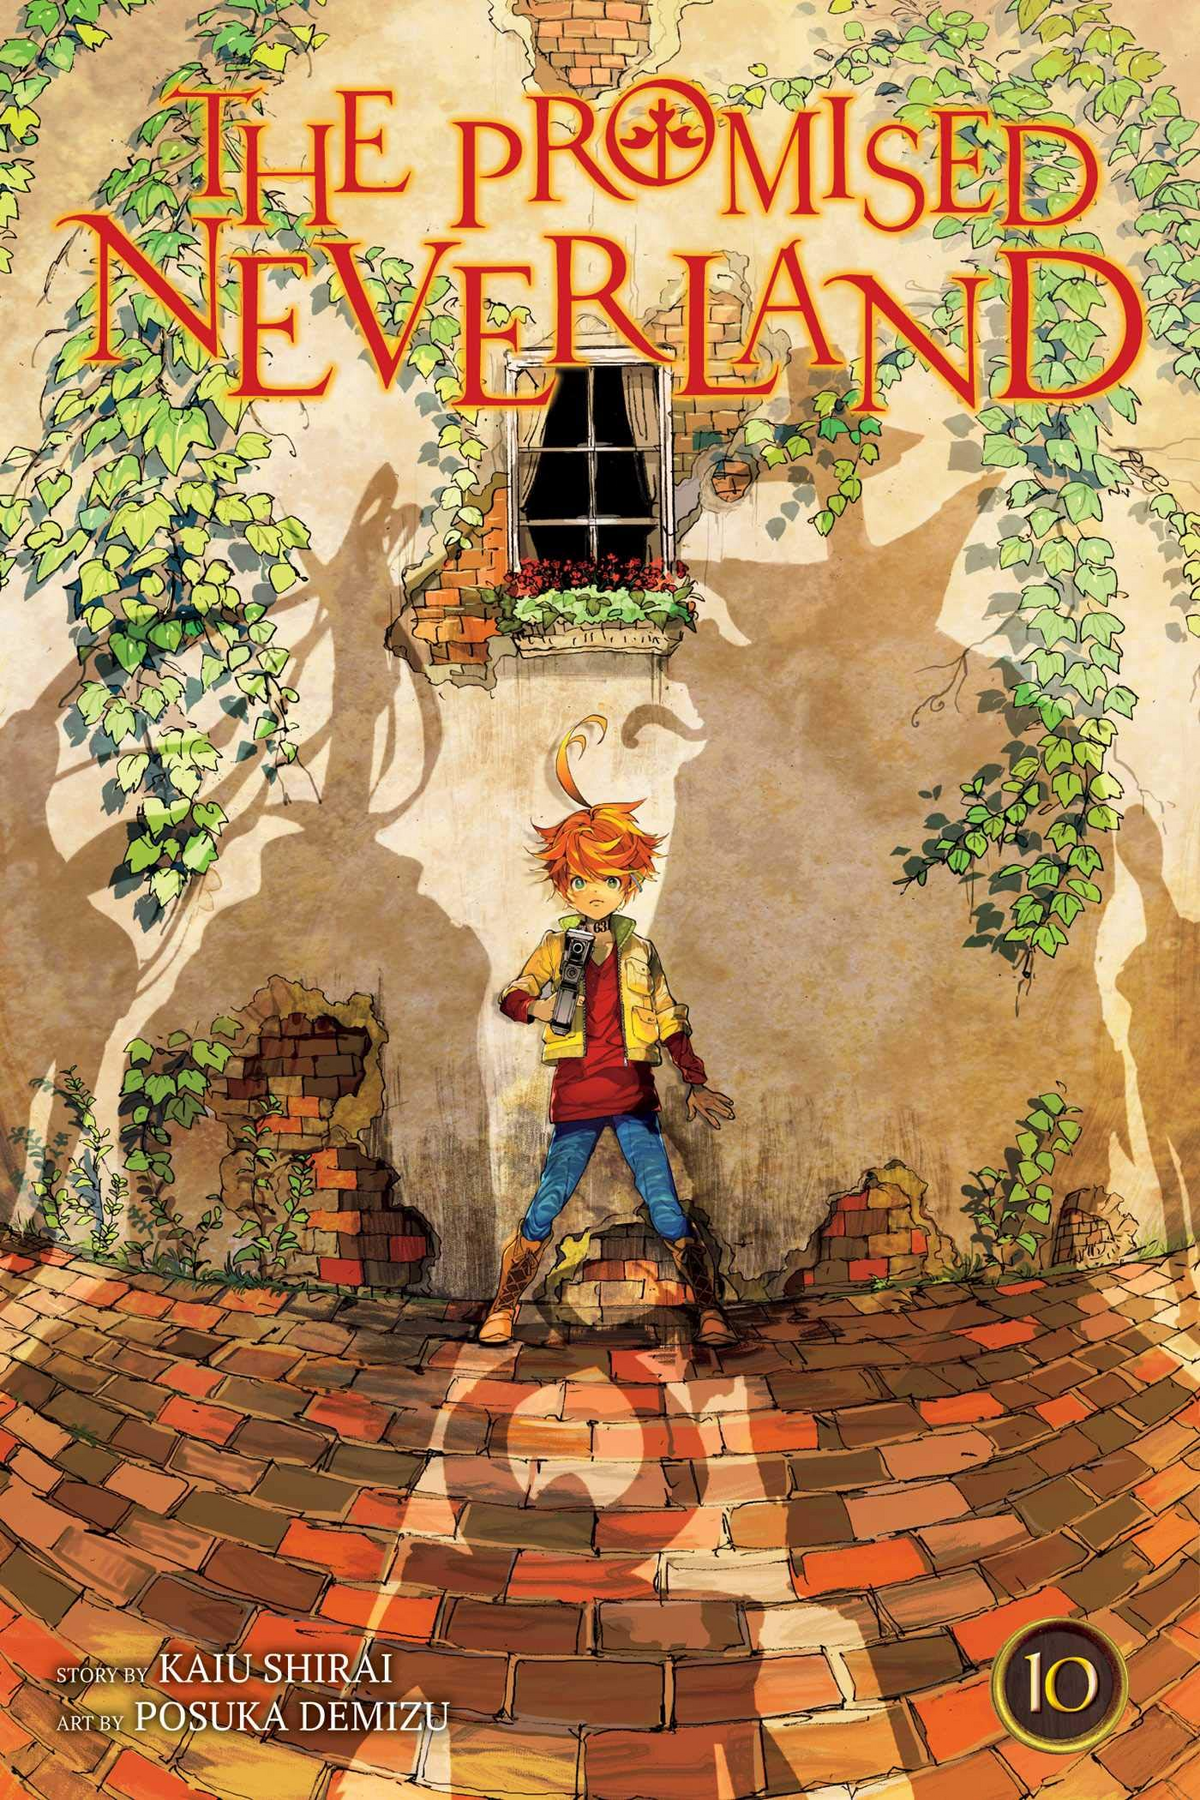 Volume 7, The Promised Neverland Wiki, FANDOM powered by Wikia